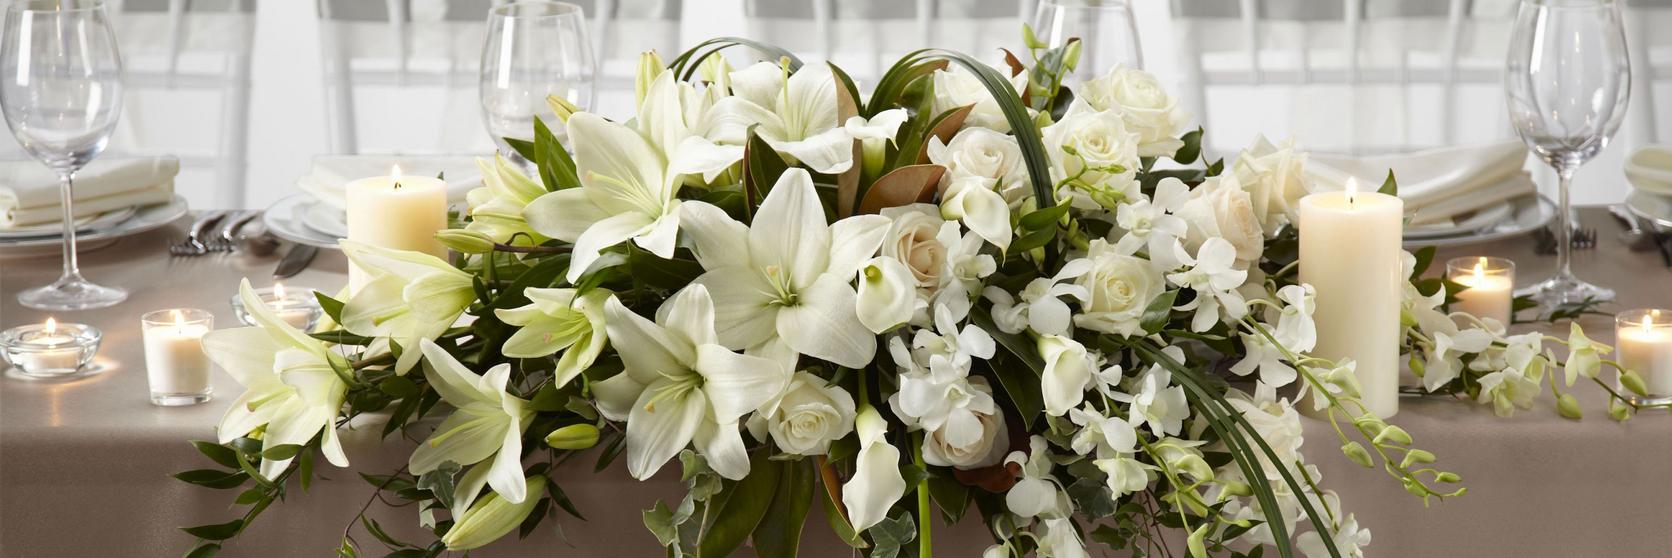 lily-white-table-decoration